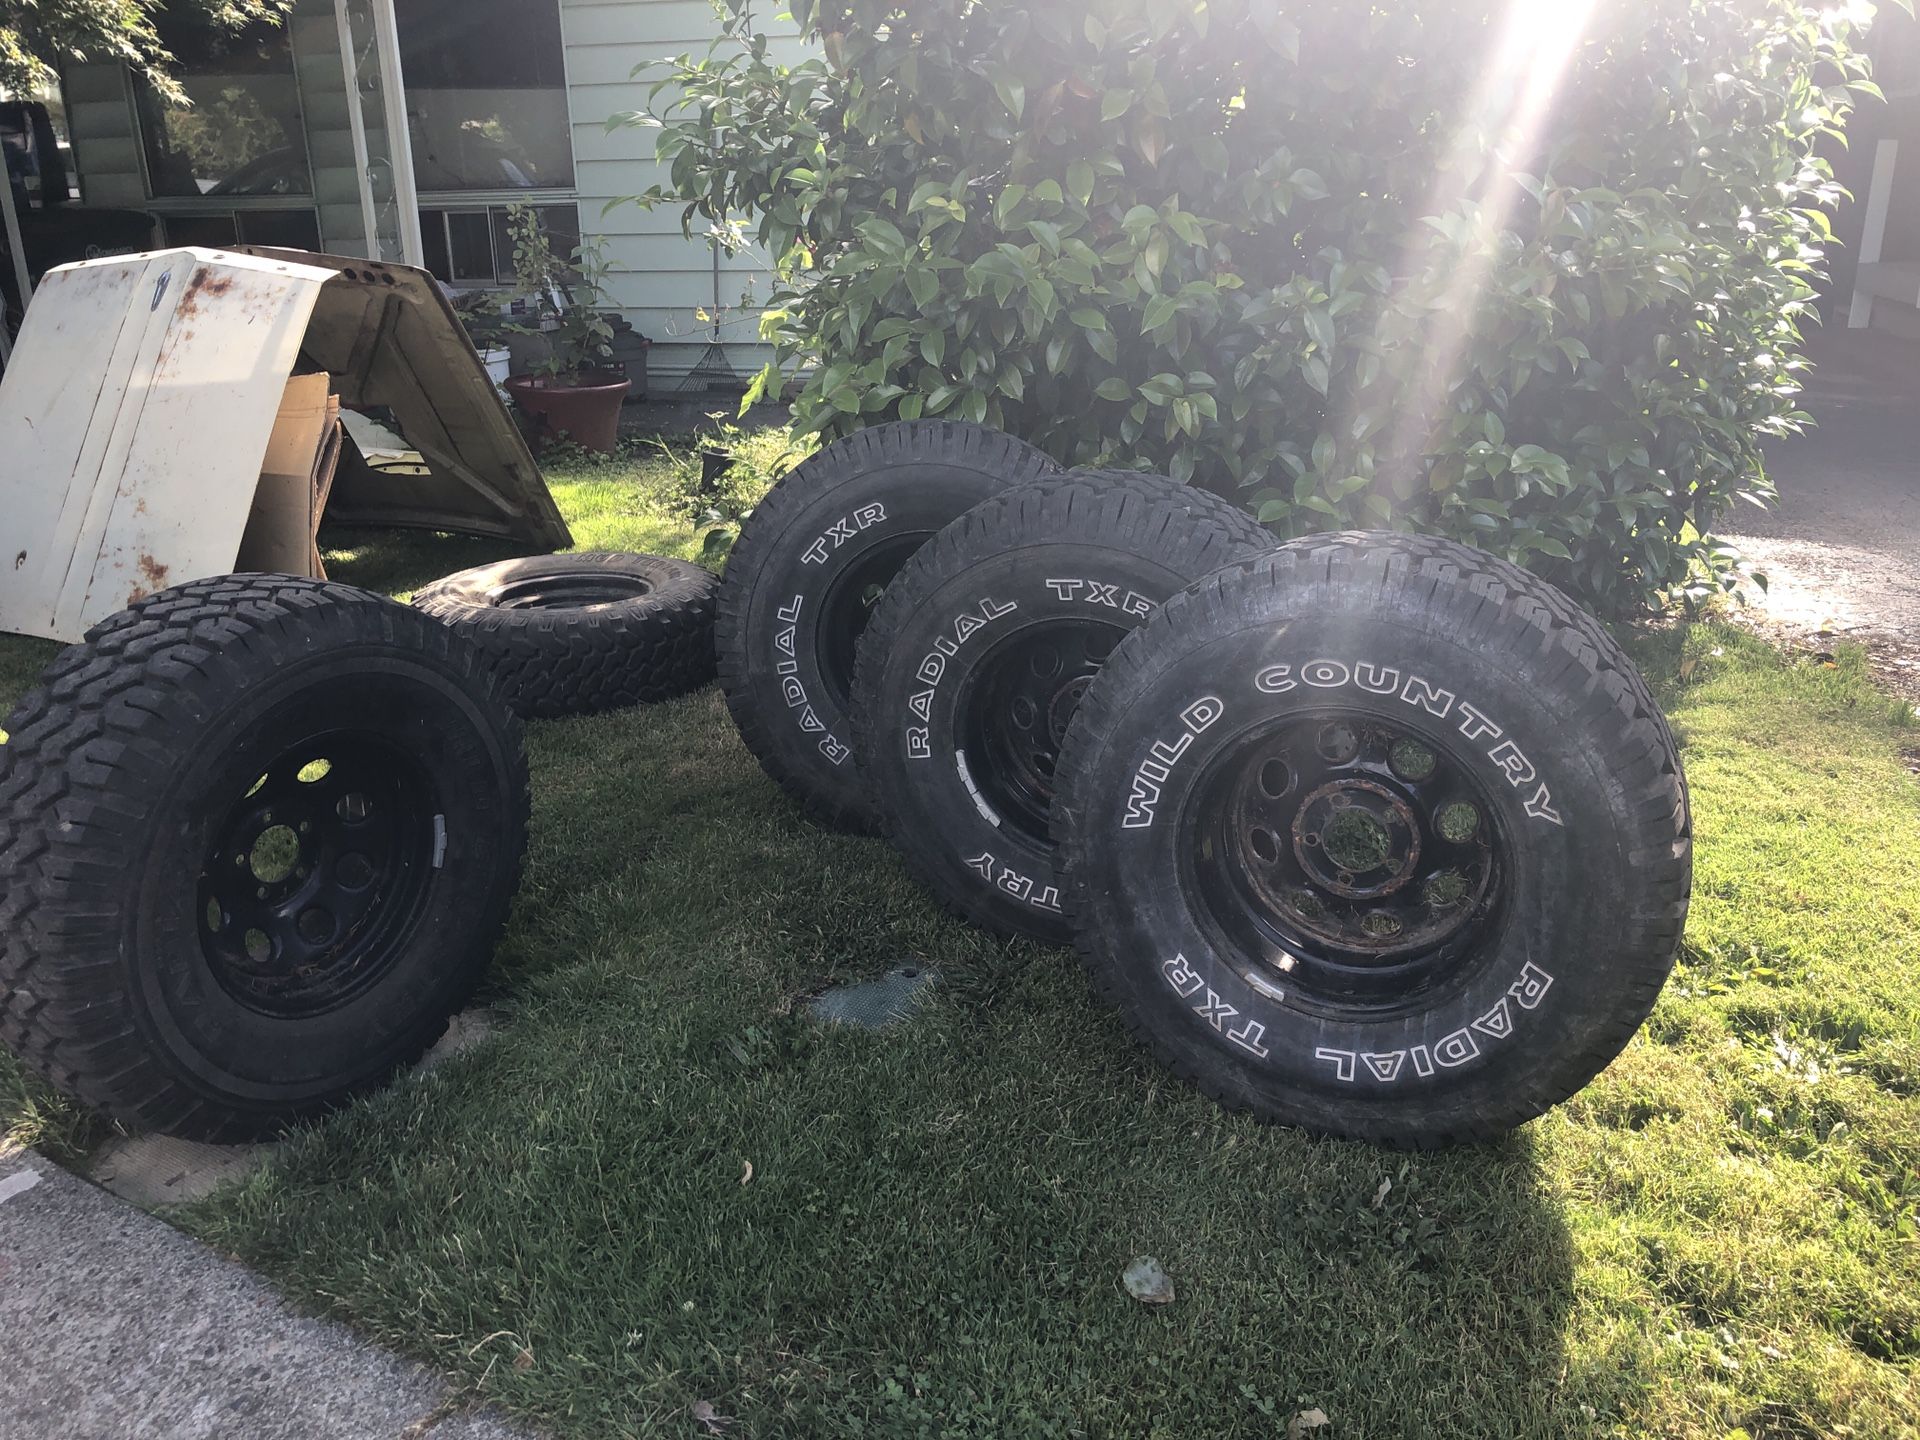 Wild Country Radial Tires on Black Jeep Rims